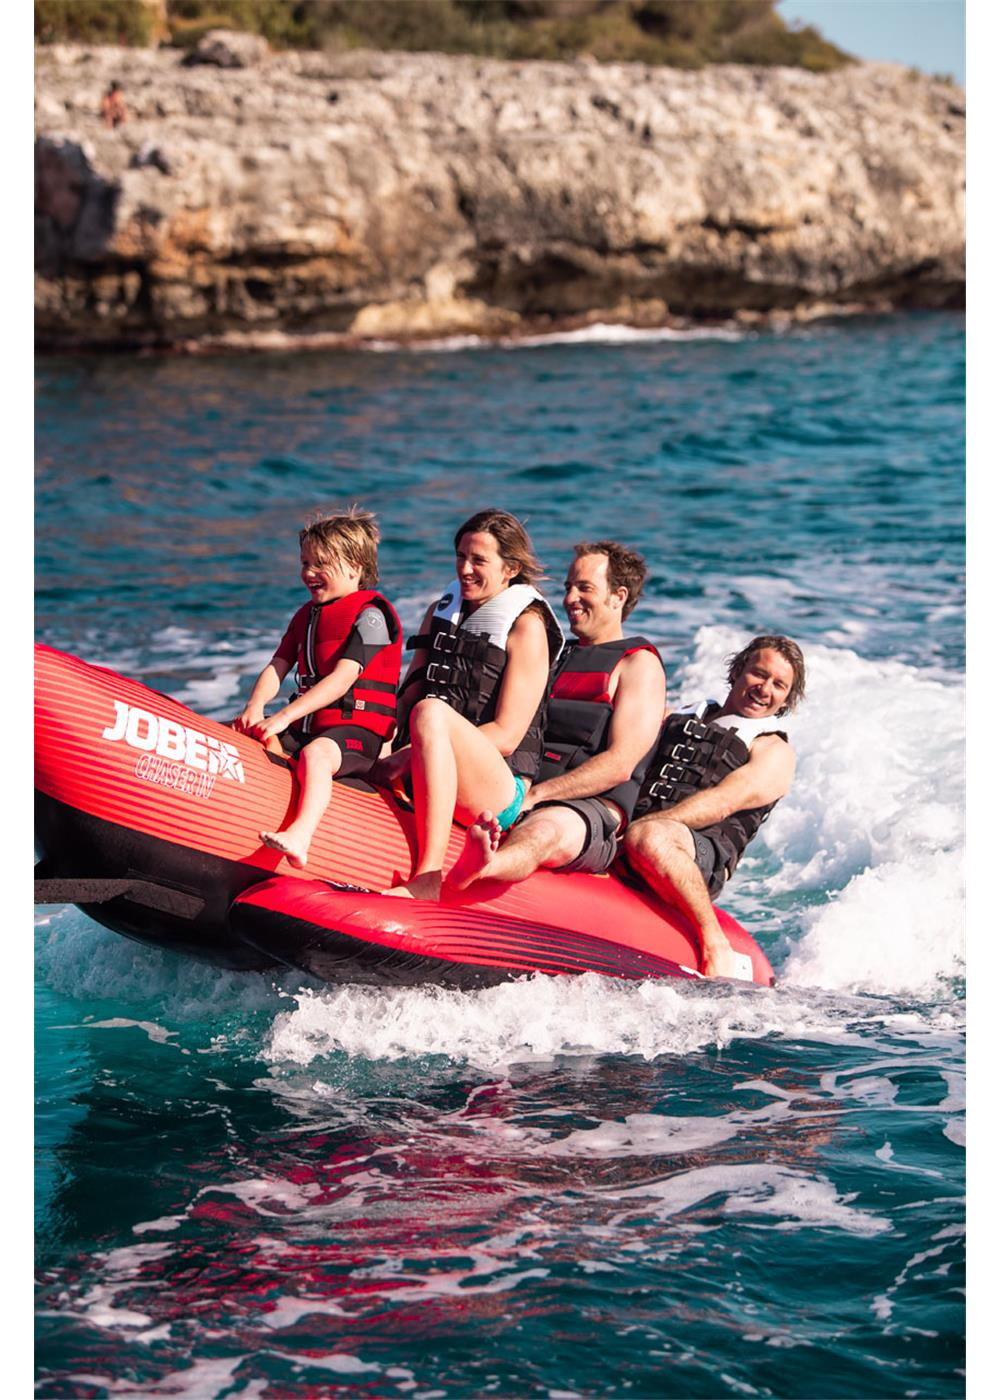 JOBE Chaser Towable 4 Person tube